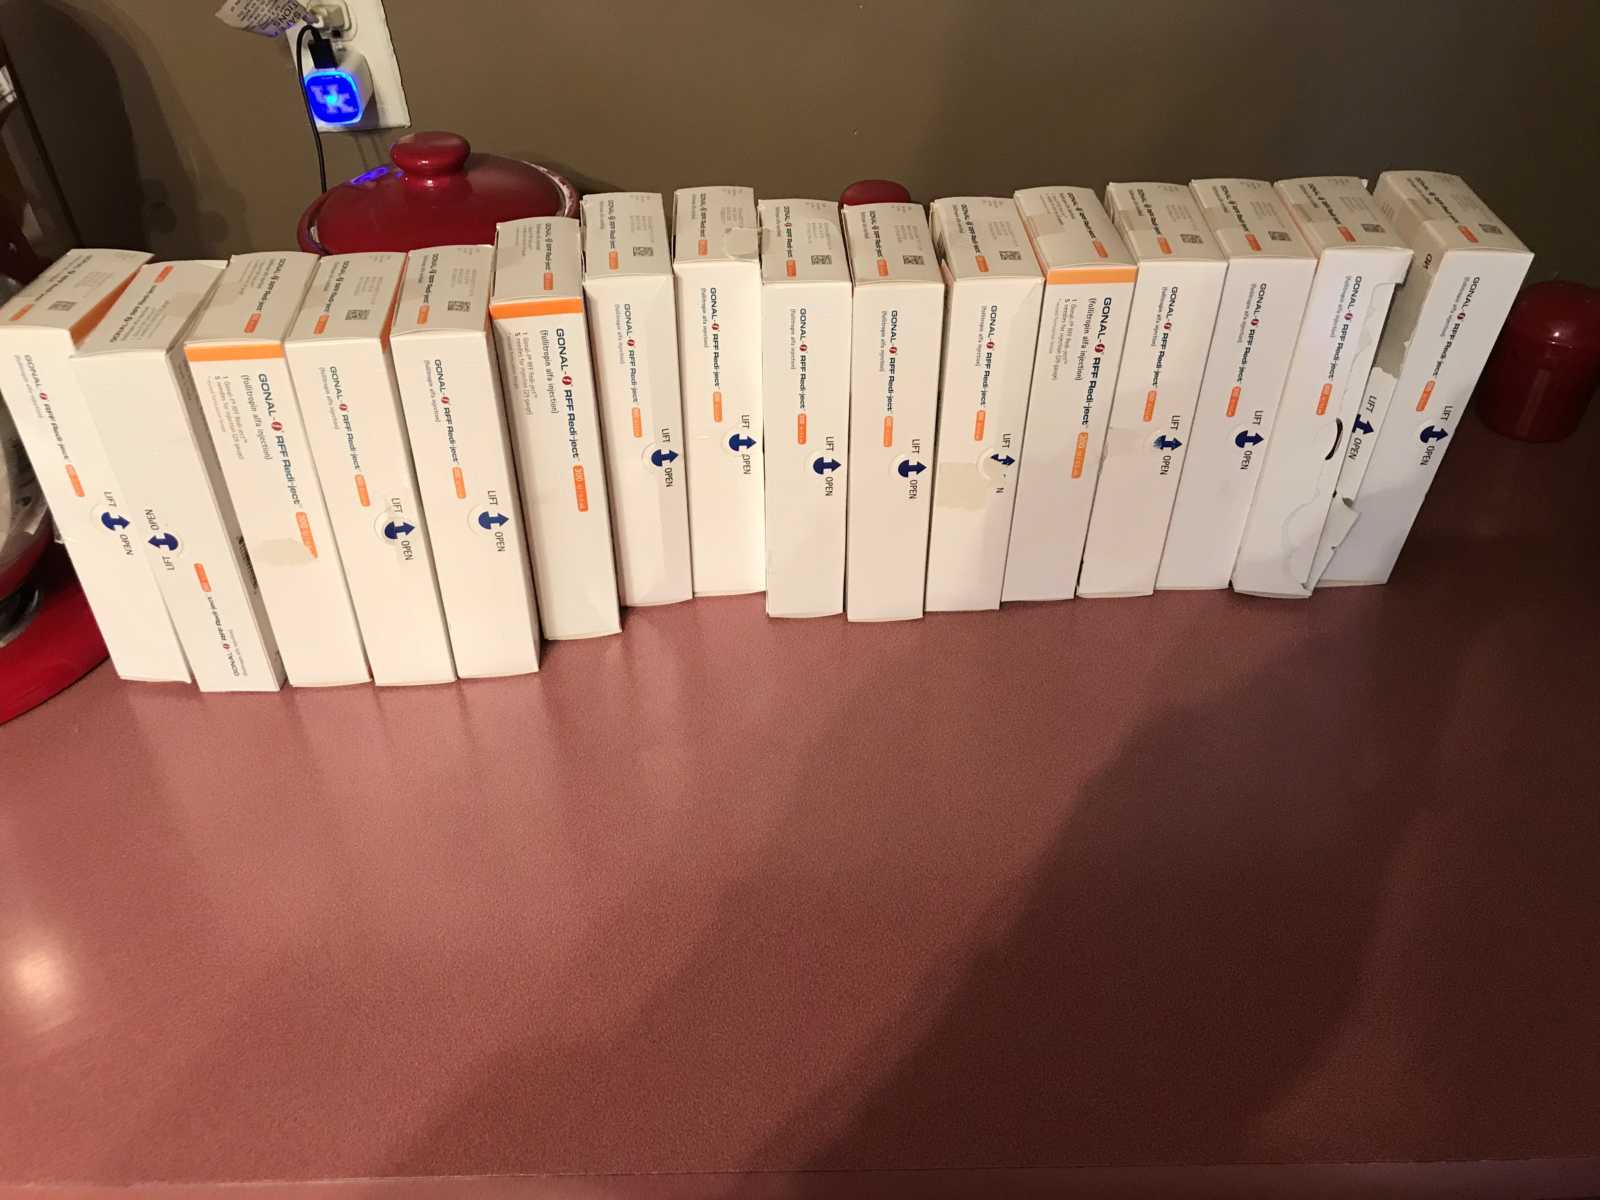 Boxes of IUI shots lined in a row for infertile woman